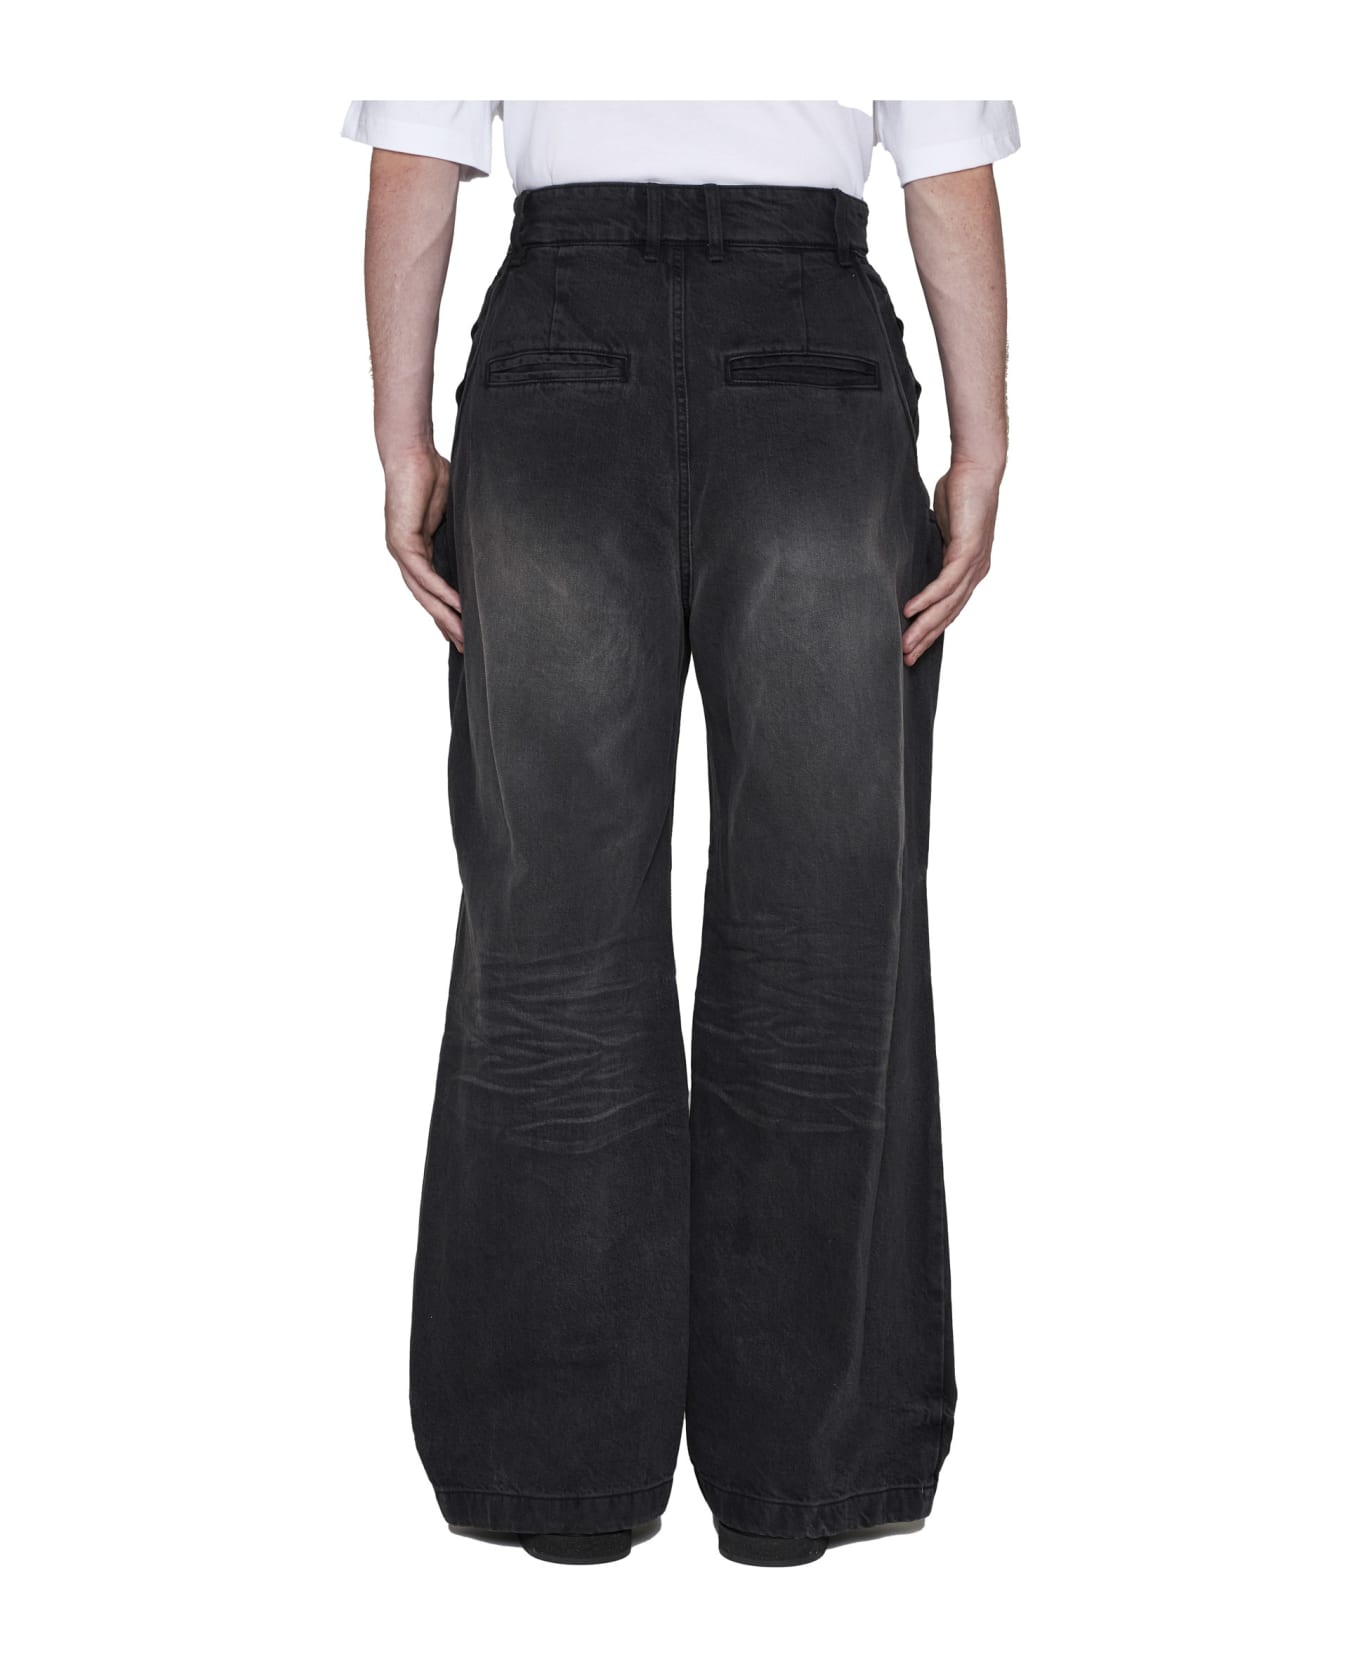 WE11 DONE Jeans - Black